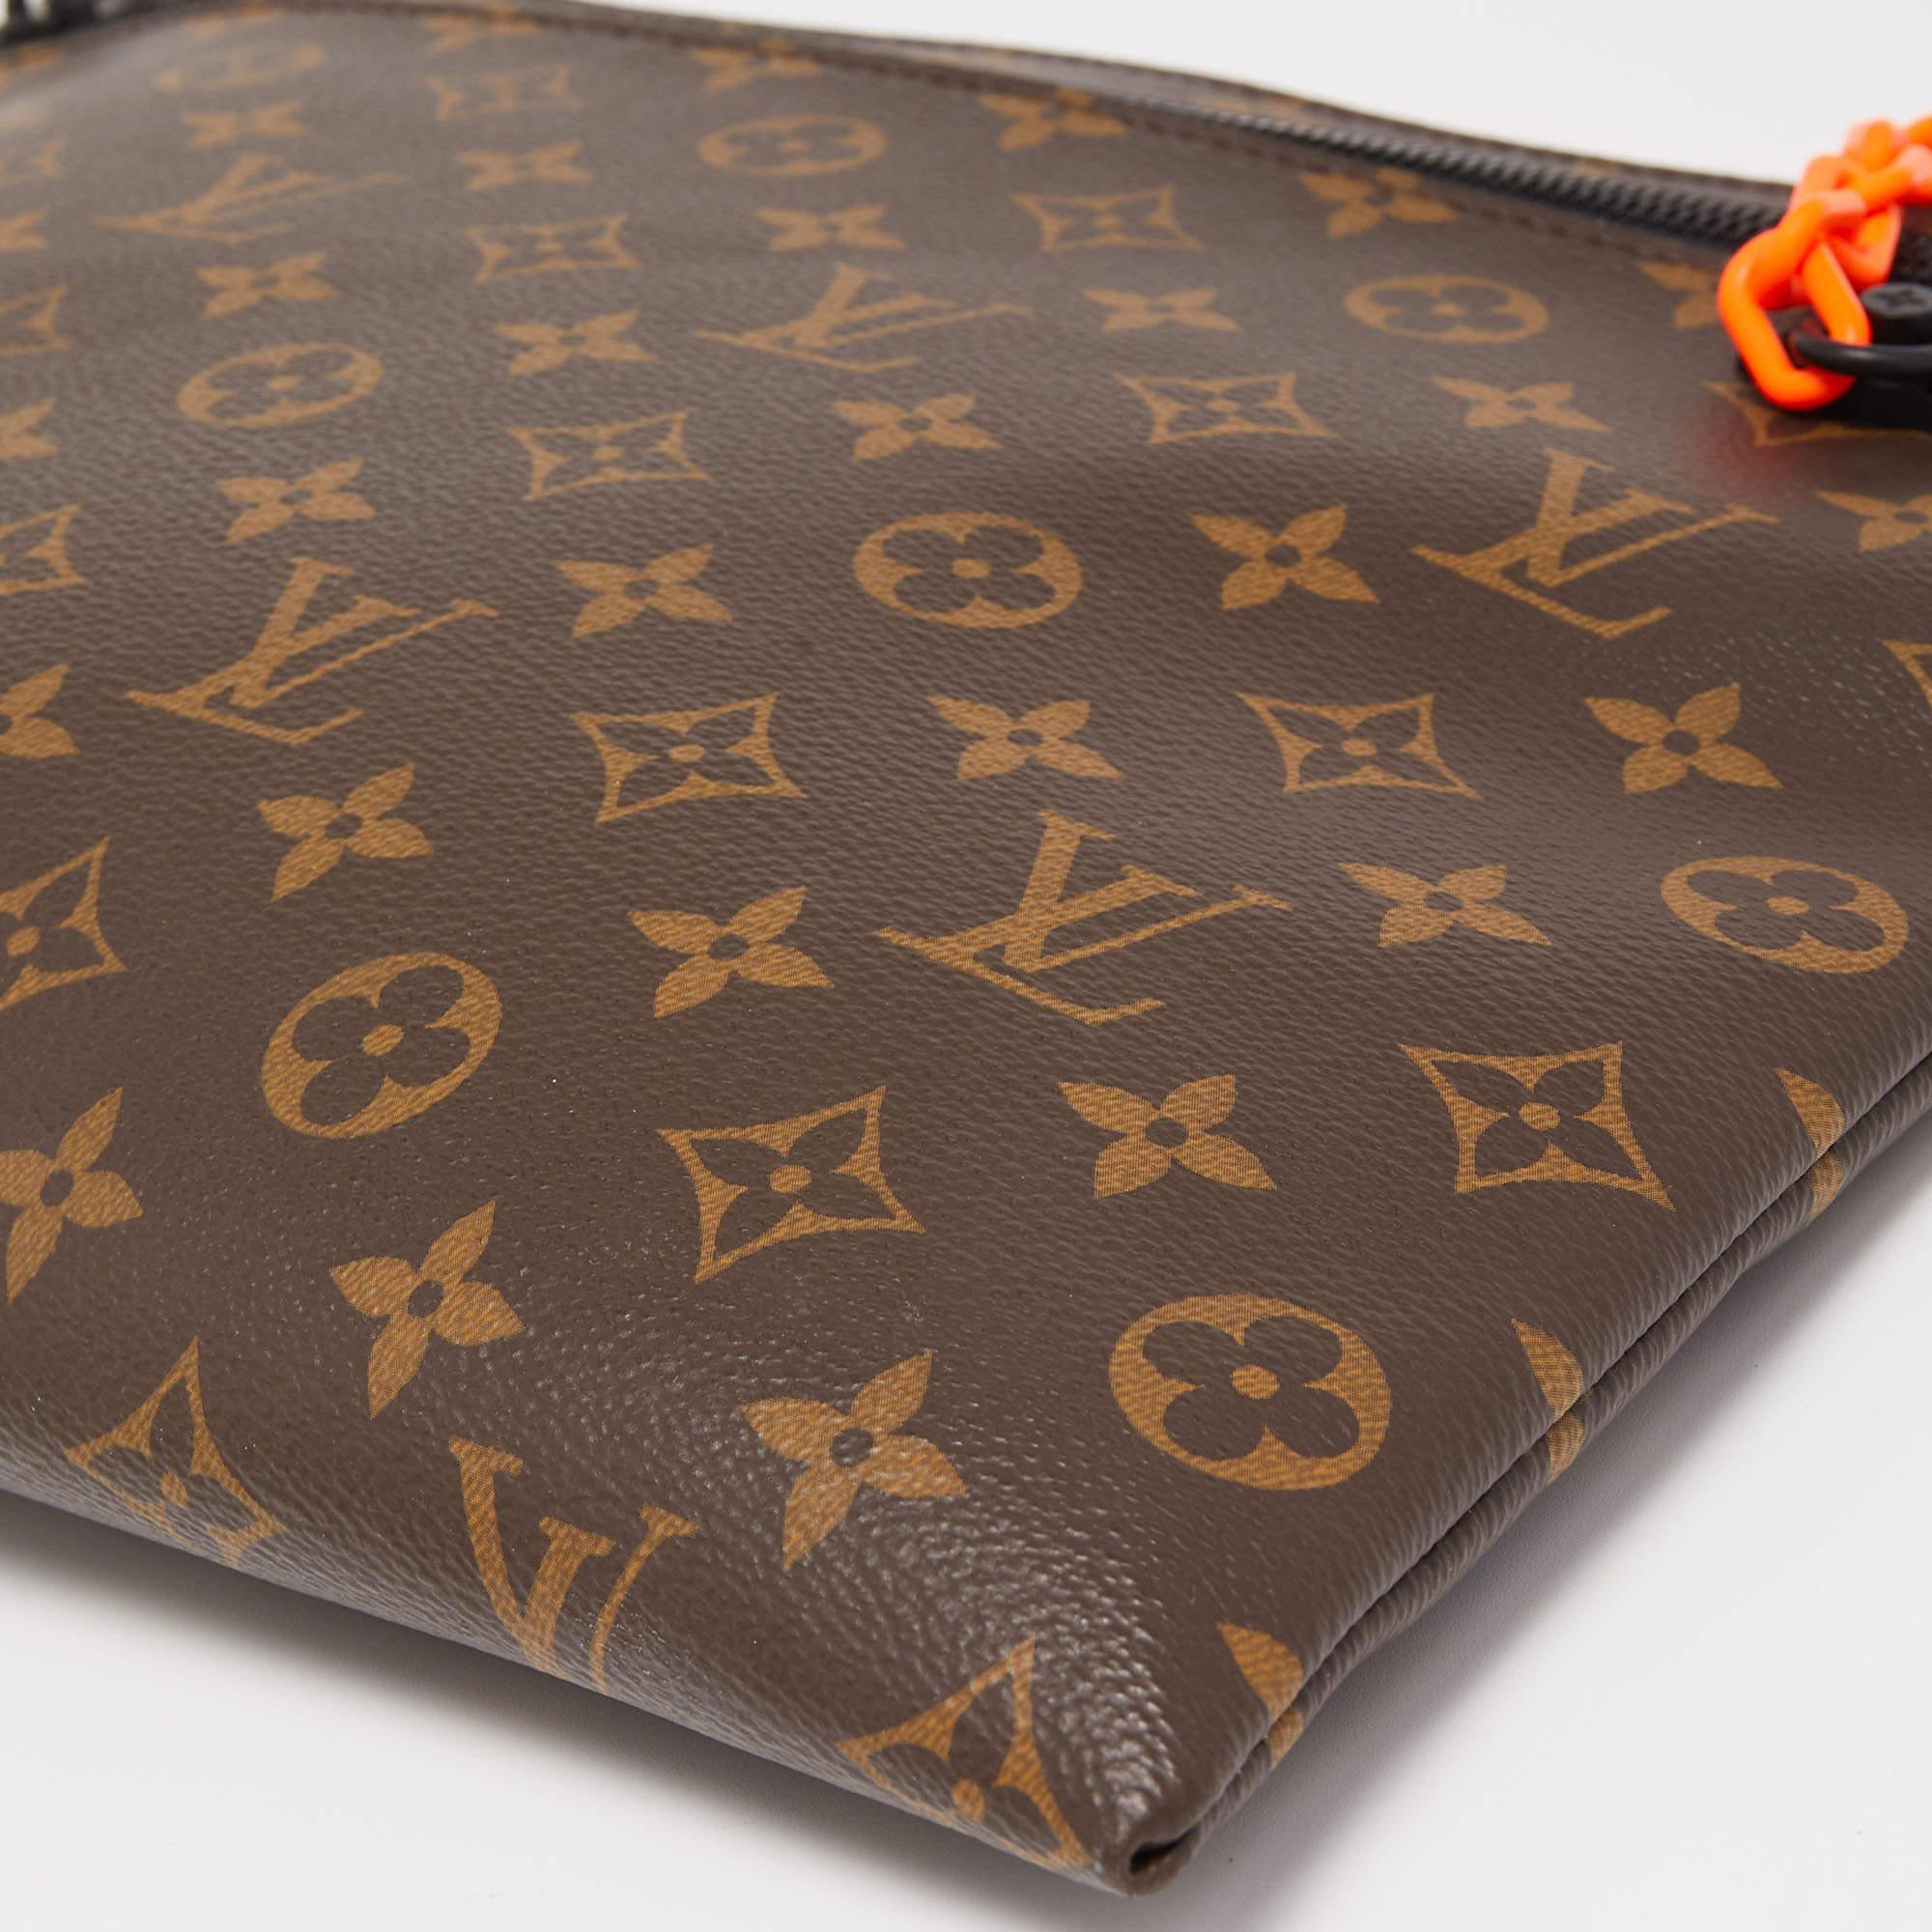 The house of Louis Vuitton offers this beautiful Solar Ray A4 Pochette to help you create timeless style edits every season. Crafted with quality materials, this piece will last you a long time.

